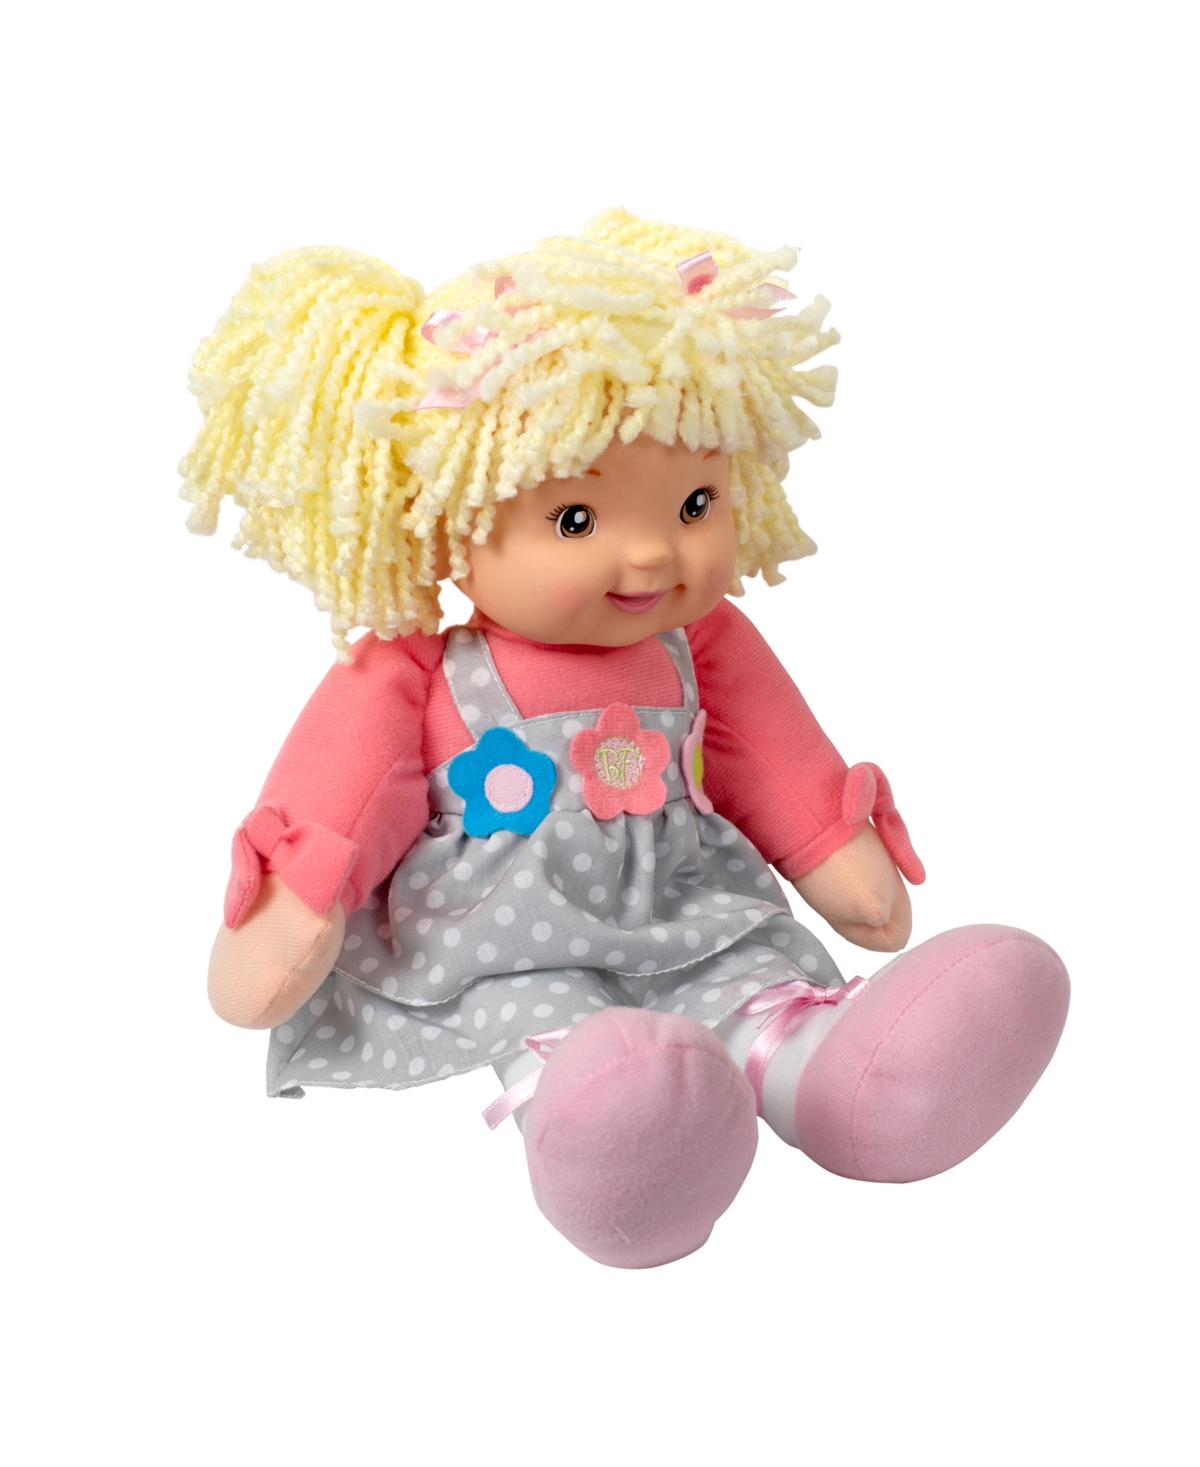 Goldberger Doll Kids' Baby's First Molly Manners Doll In Multi